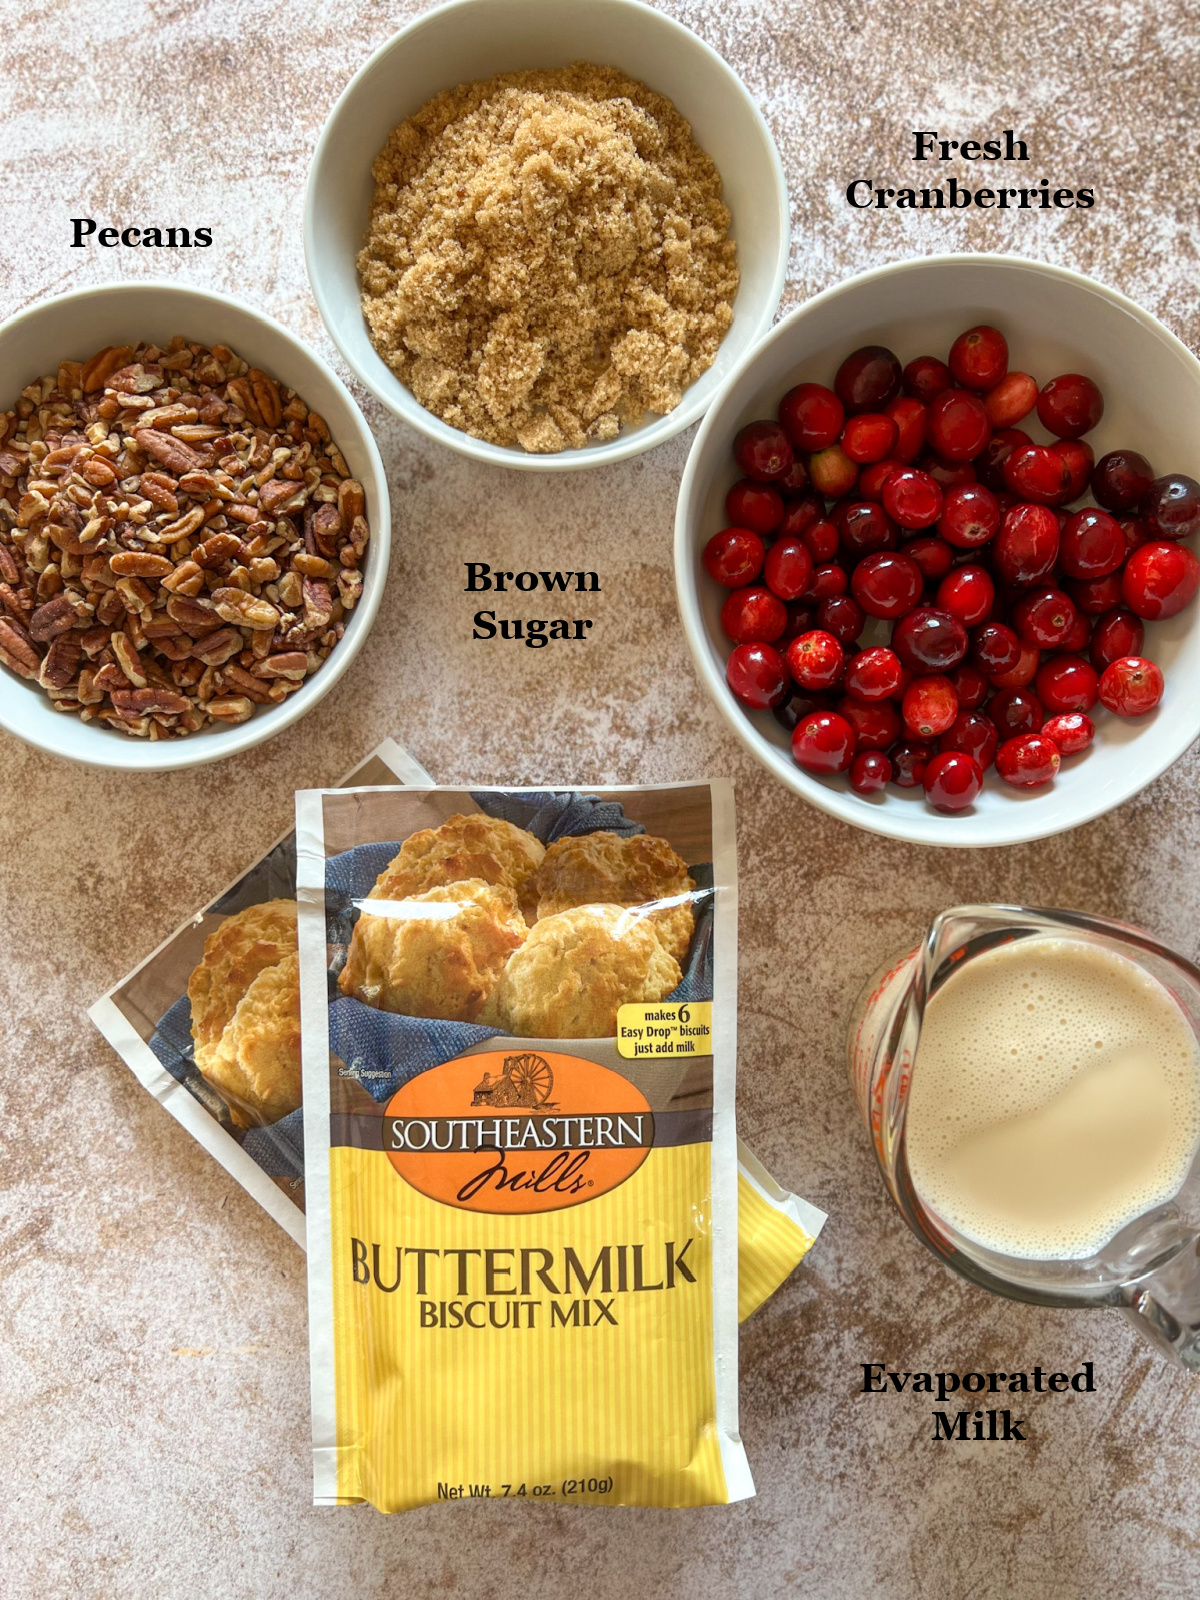 Ingredients for making the easiest buttermilk biscuits with fresh cranberries